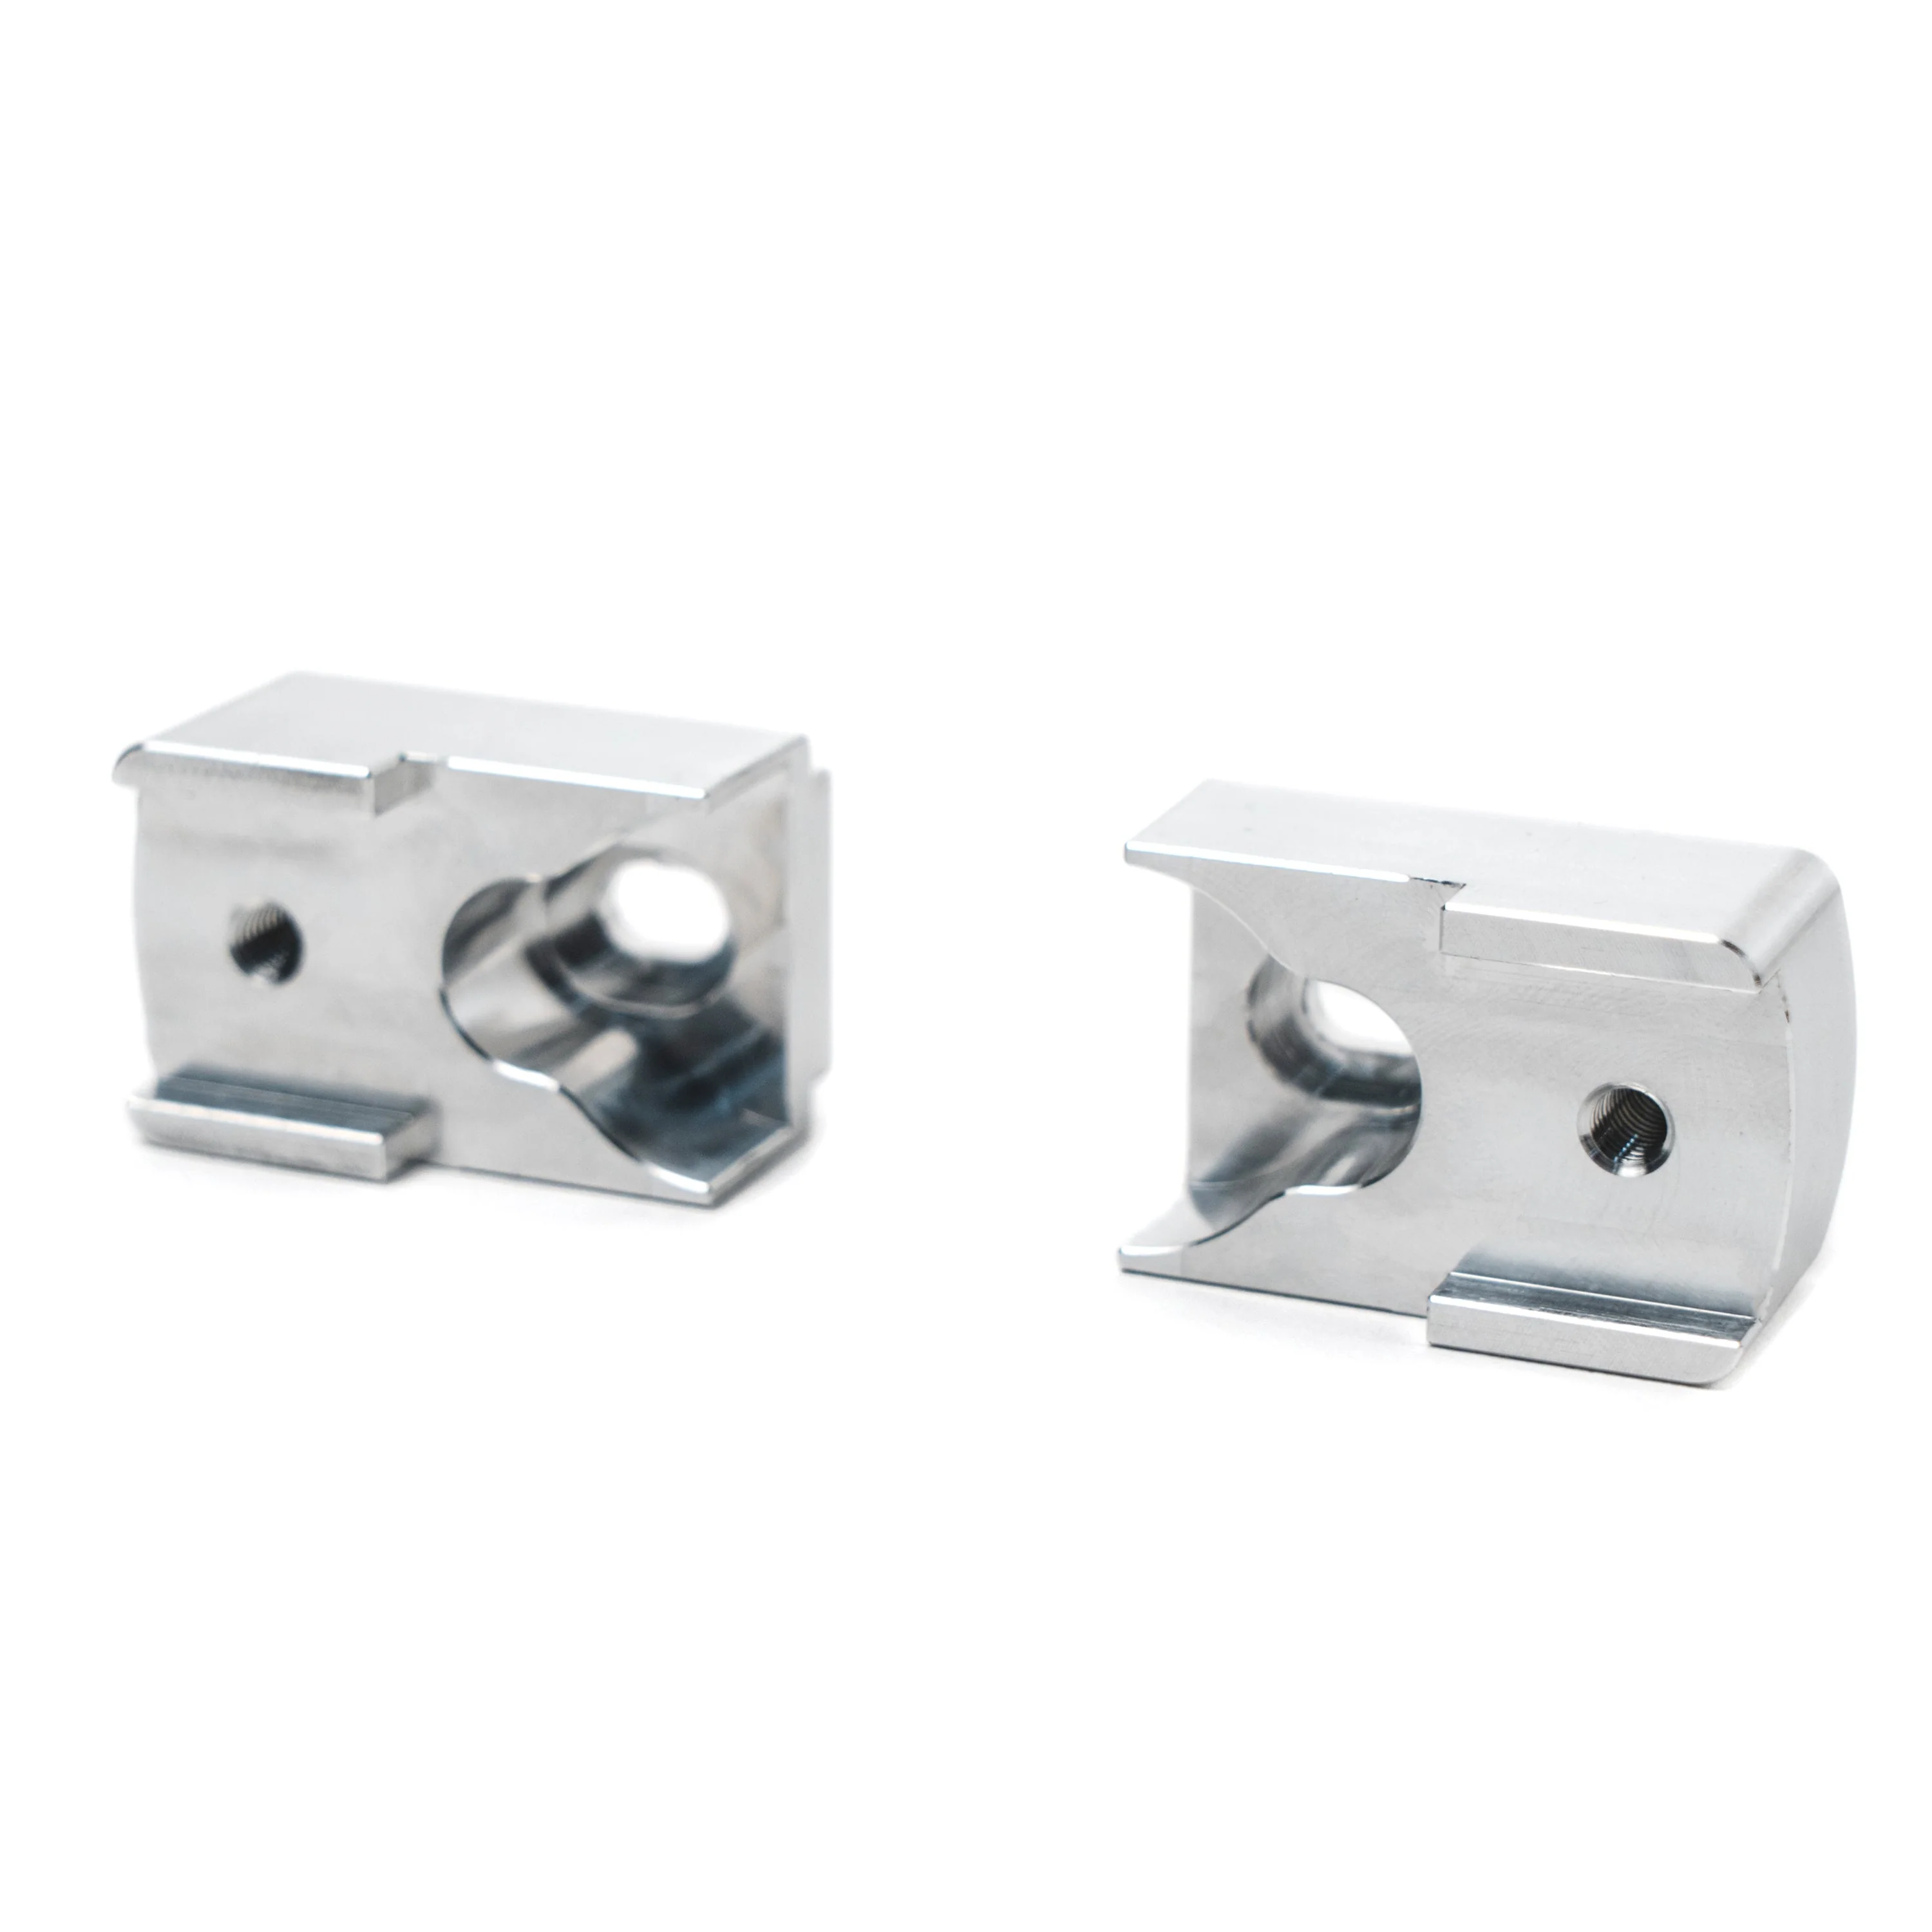 L-Adapters for K03 and Kadet Clamps Questions & Answers